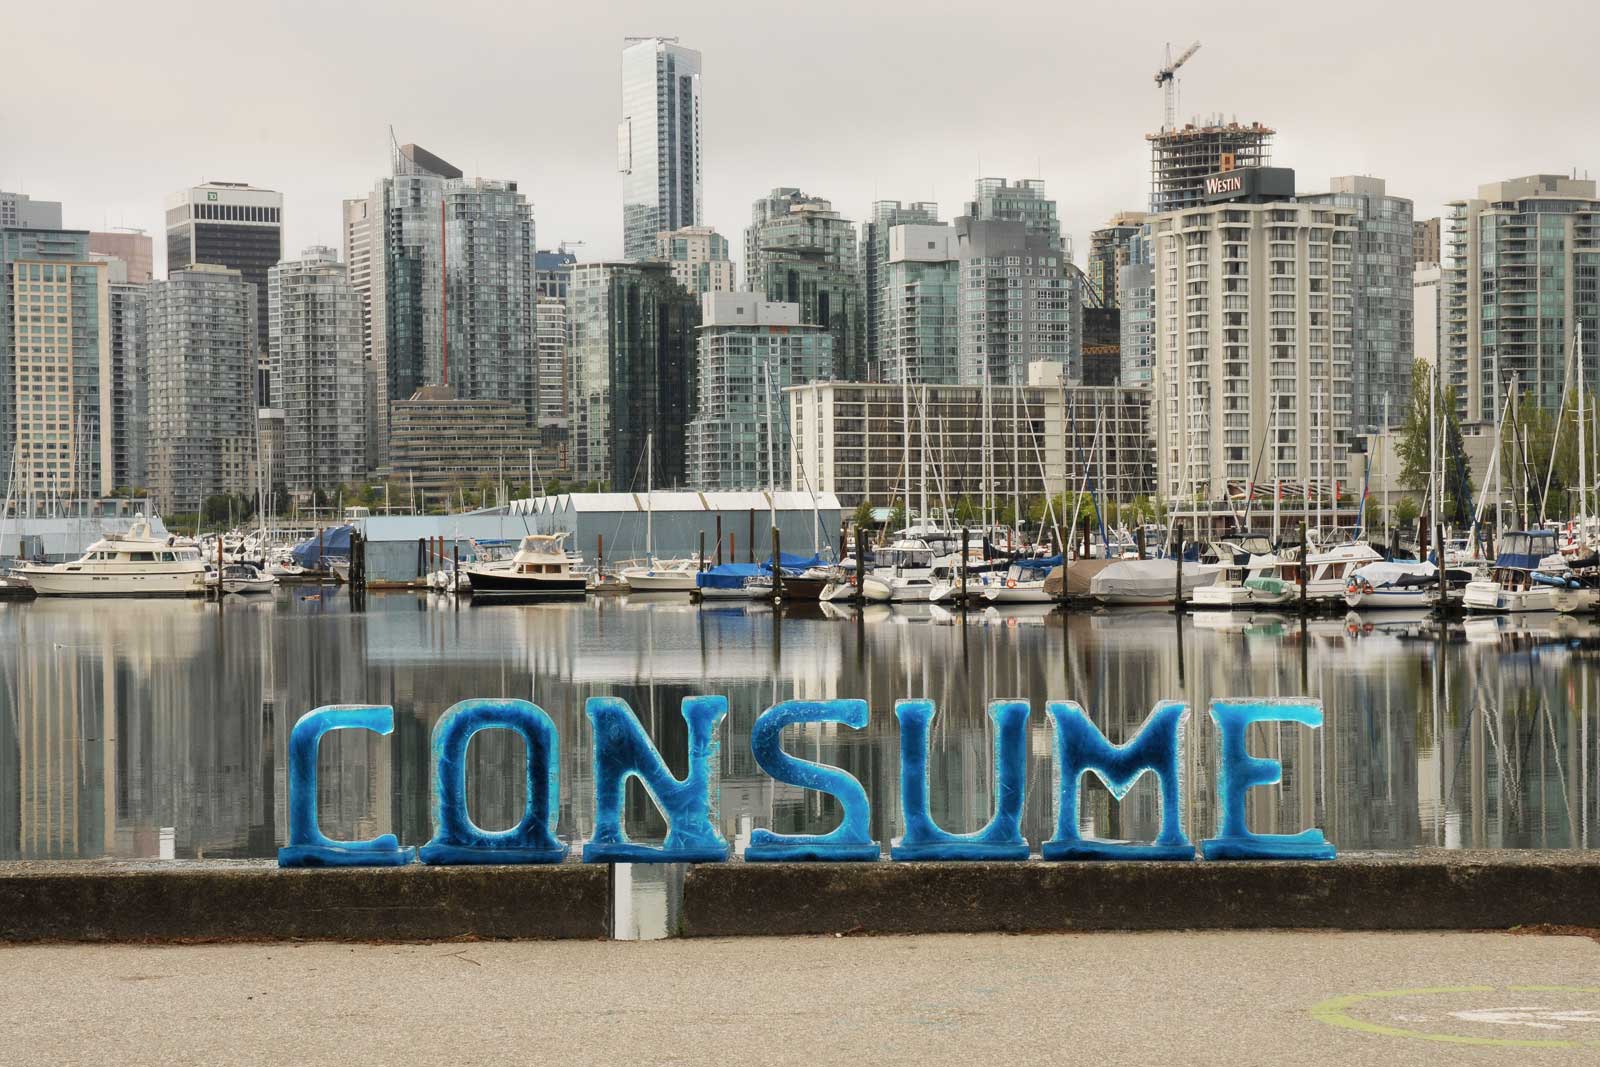 CONSUME spelled with ice letters with city in background